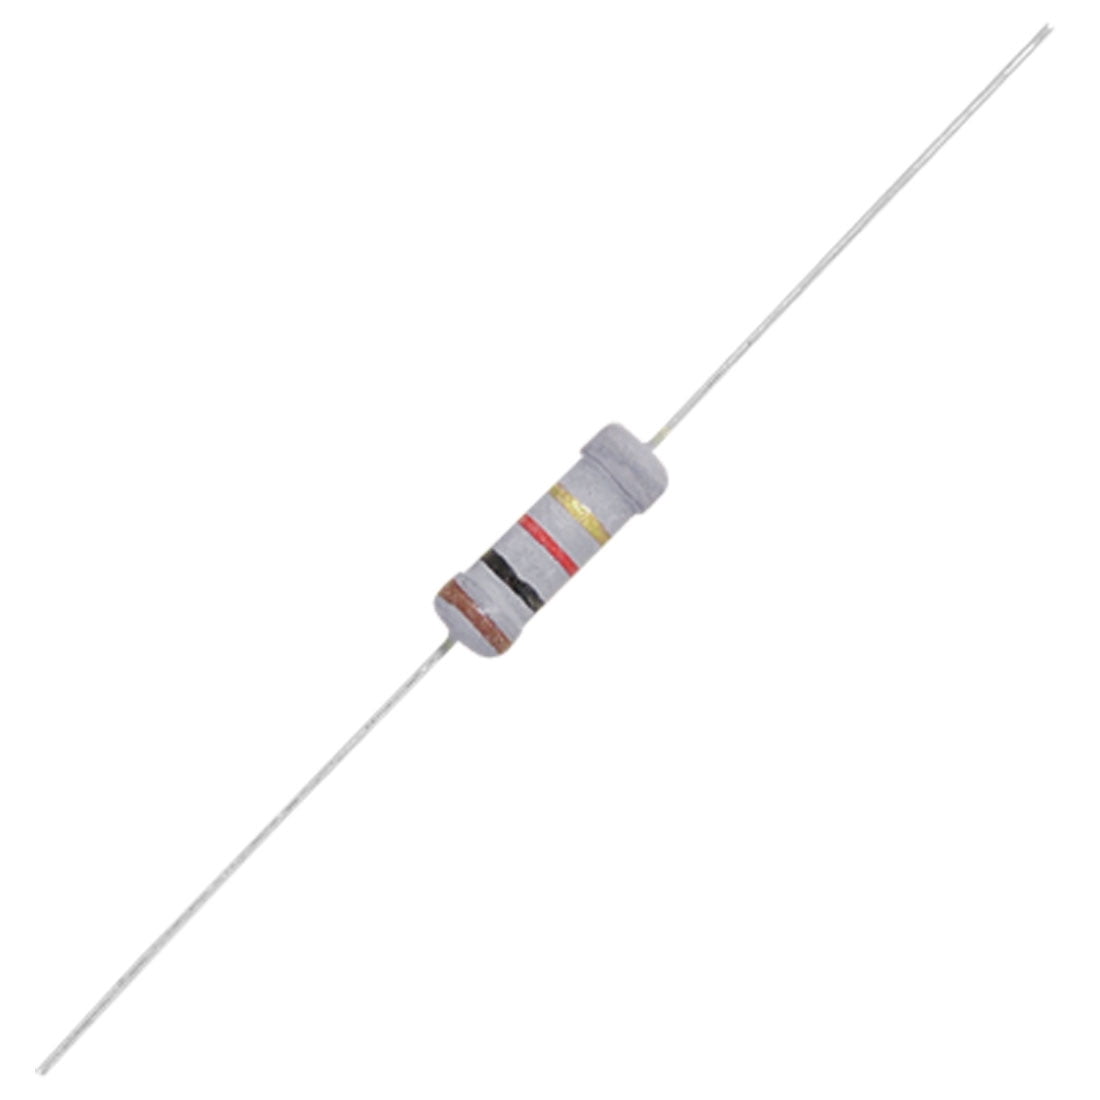 220ohm 1W Metal Film Resistor 1 Watt for Electrical Products Circuits TVs 